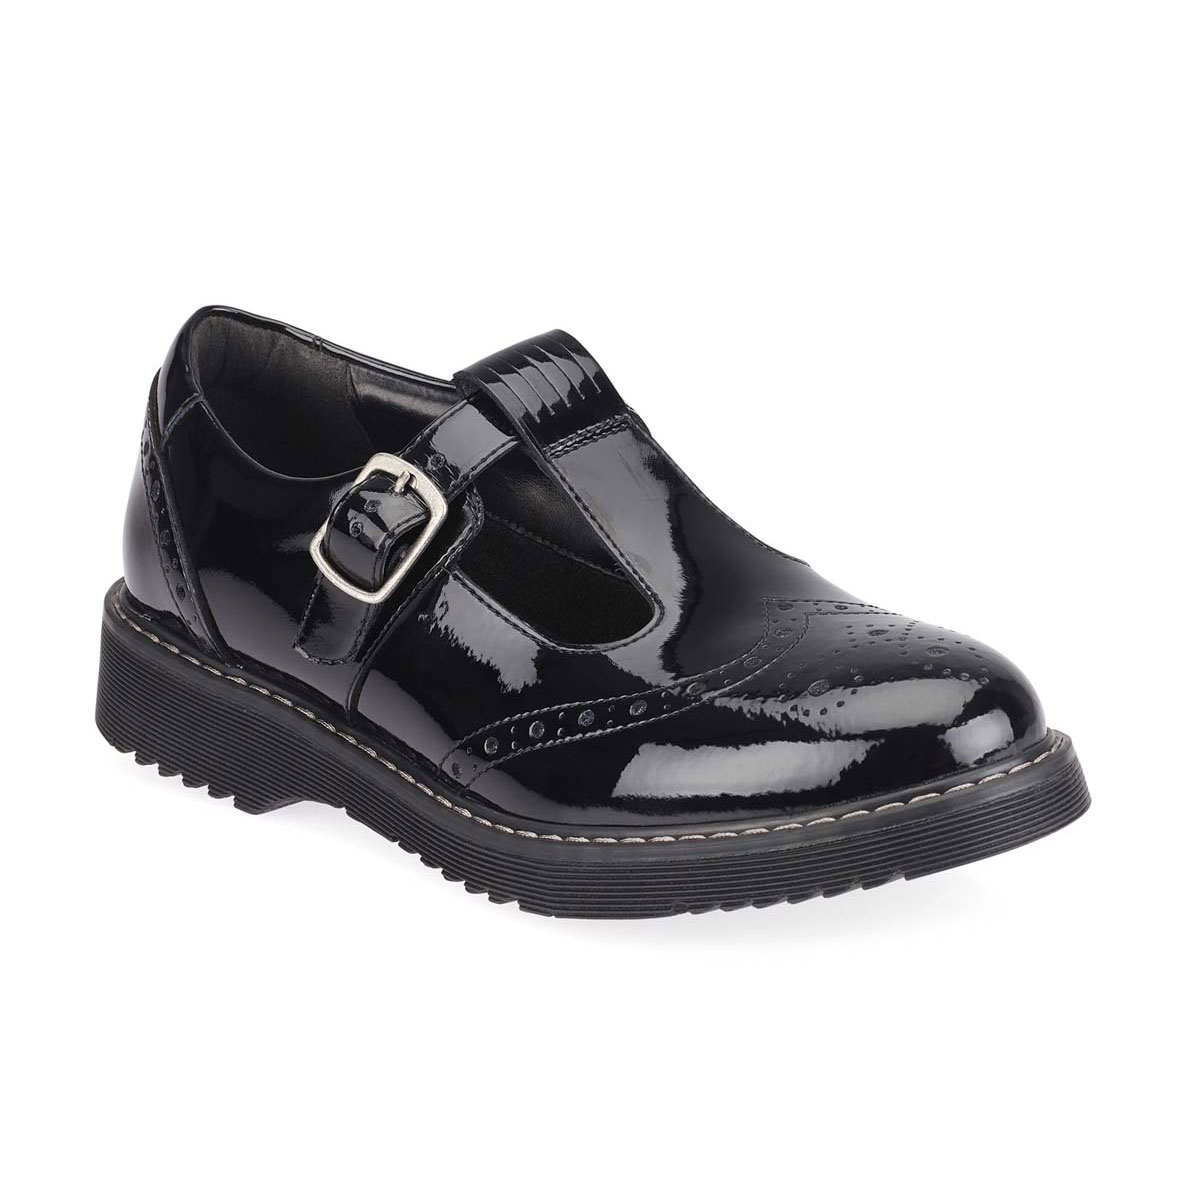 Start Rite - F Imagine T Bar In Black Patent 3510-3 In Size 36 In Plain Black Patent For School Girls Shoes  In Black Patent For kids